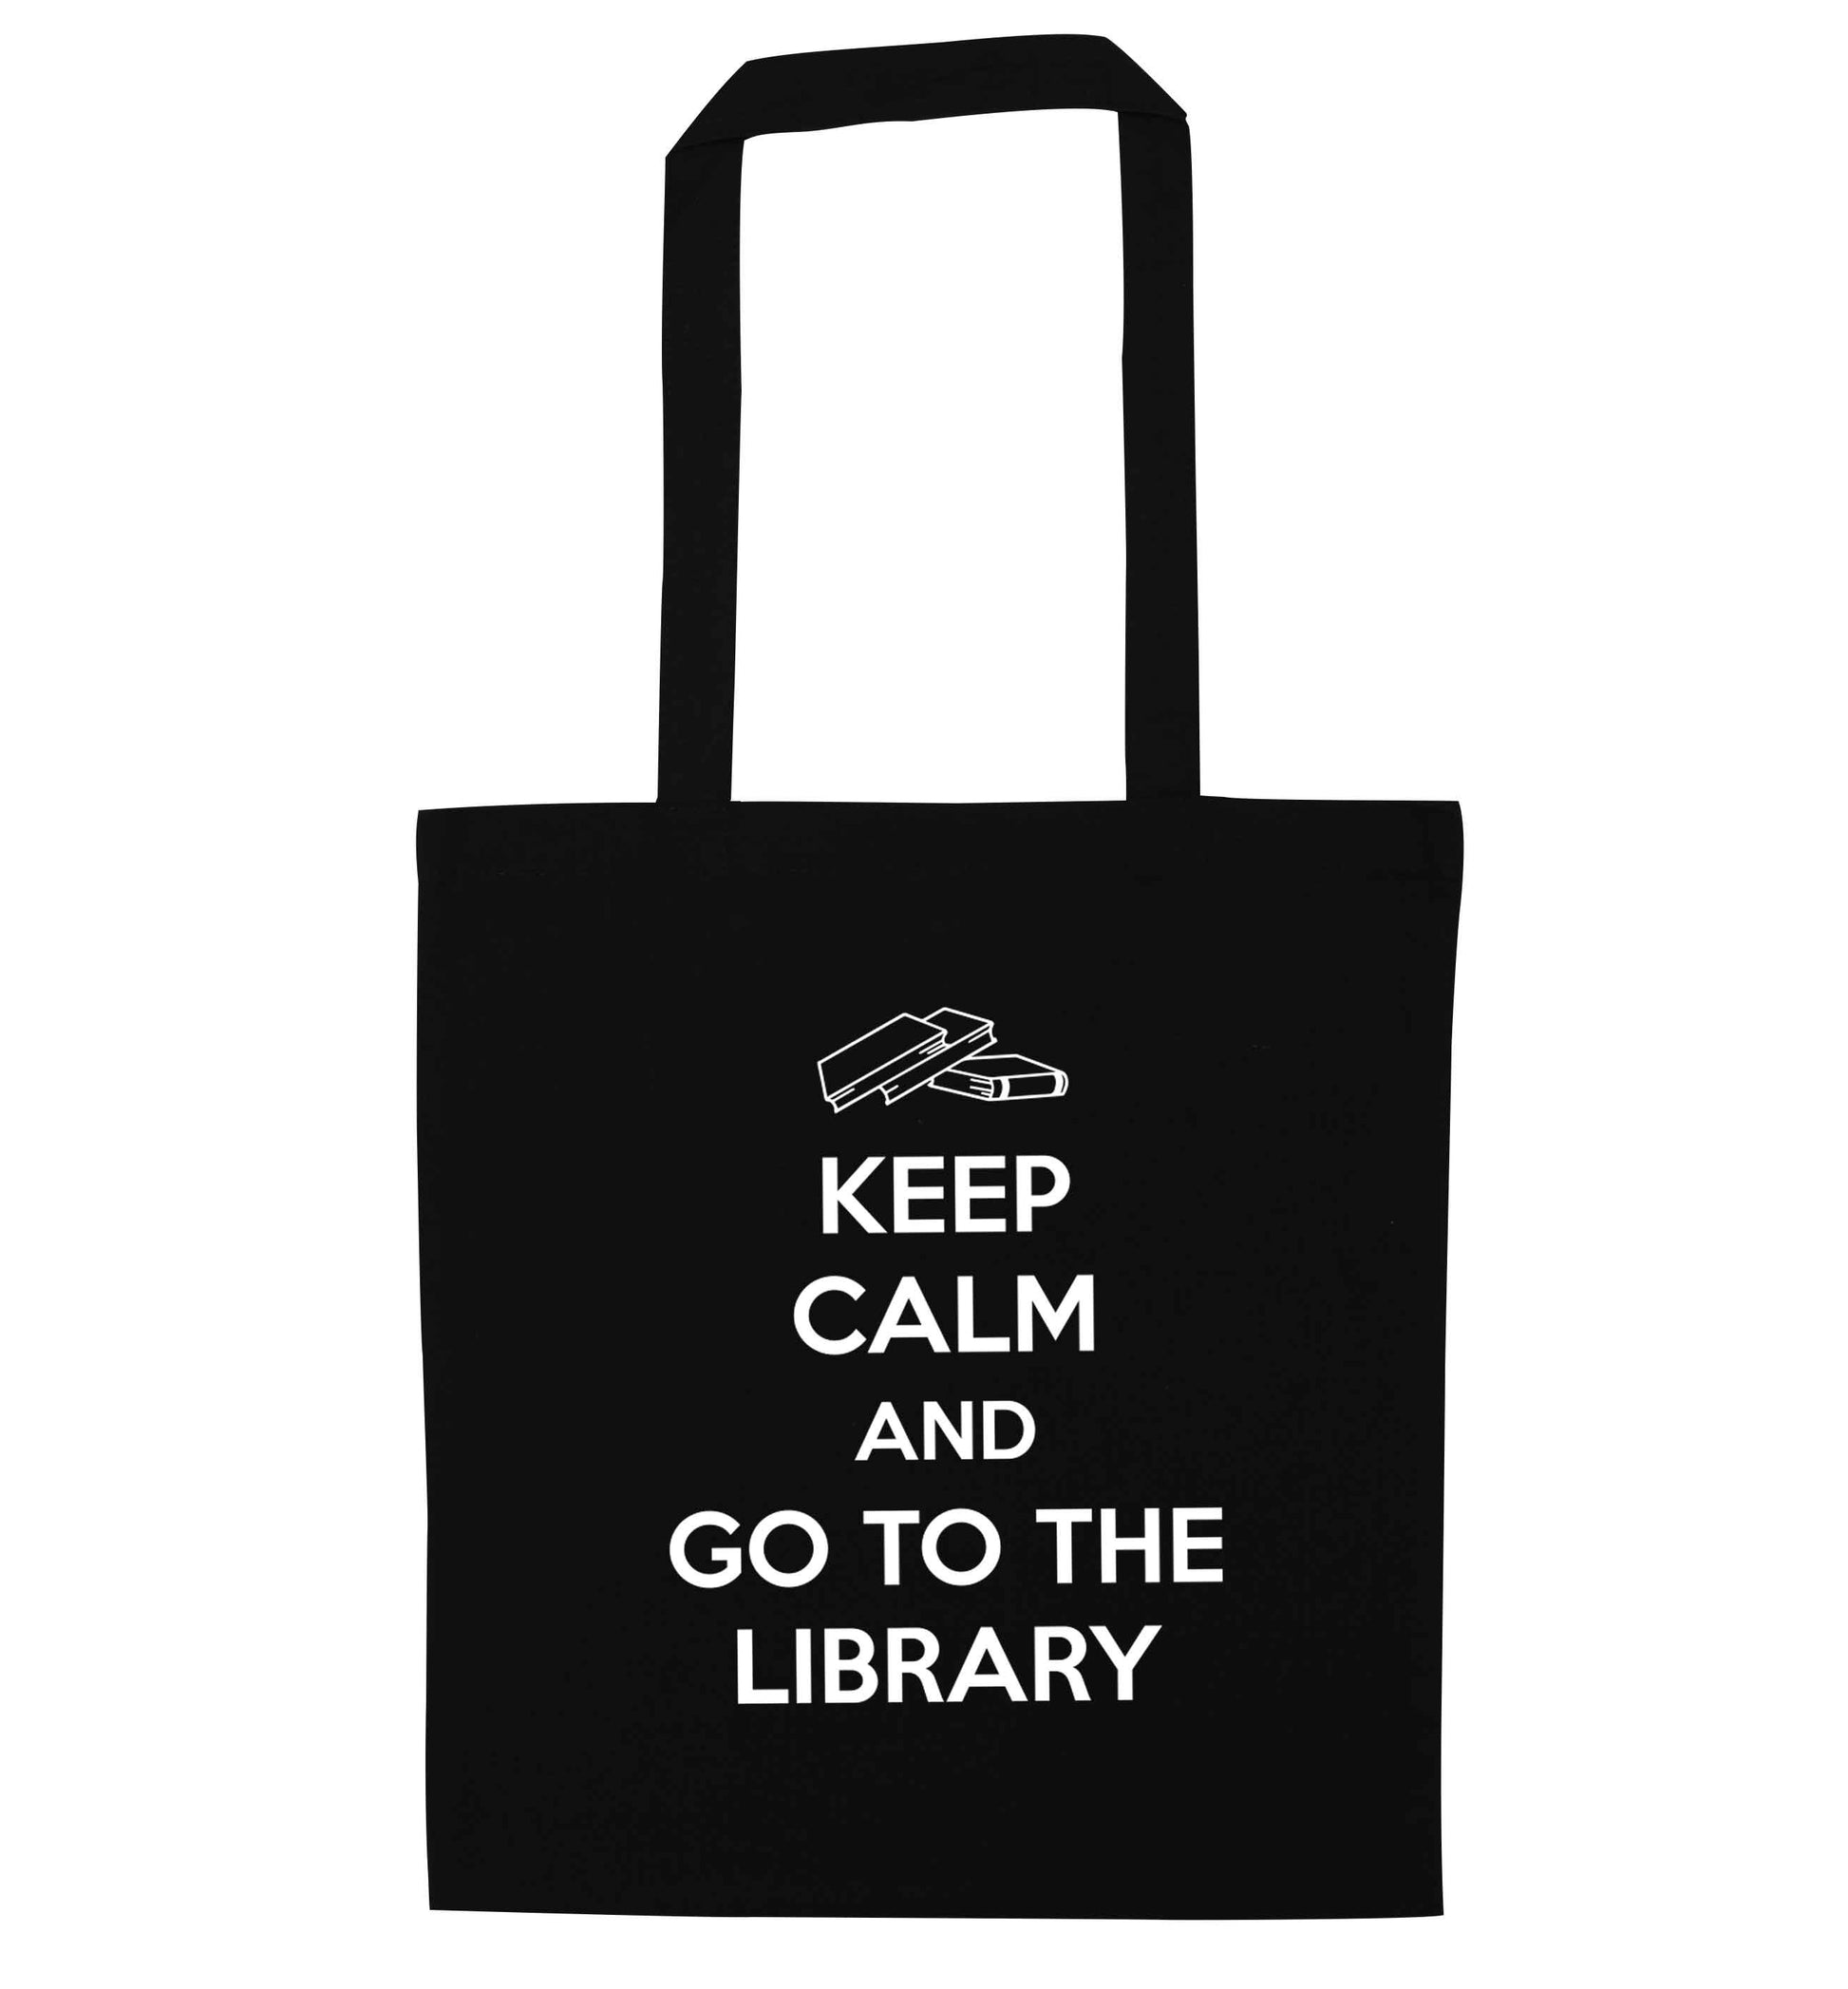 Keep calm and go to the library black tote bag